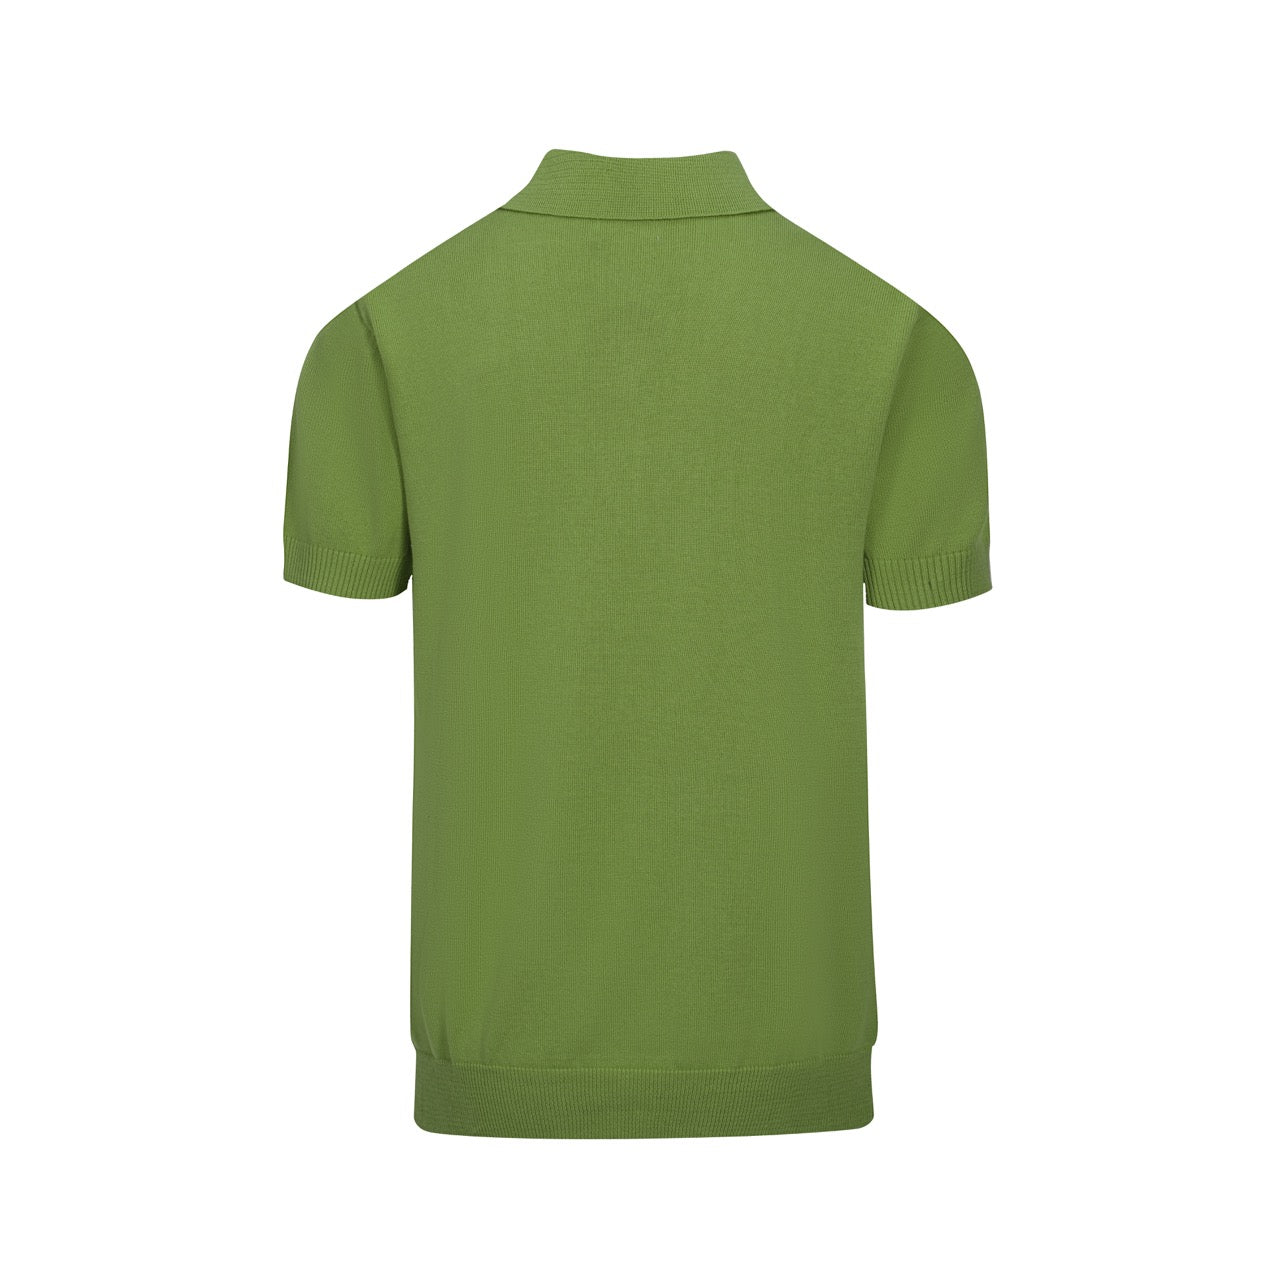 Men's Green Knitted Polo With Off White Jacquard Panel Stripe